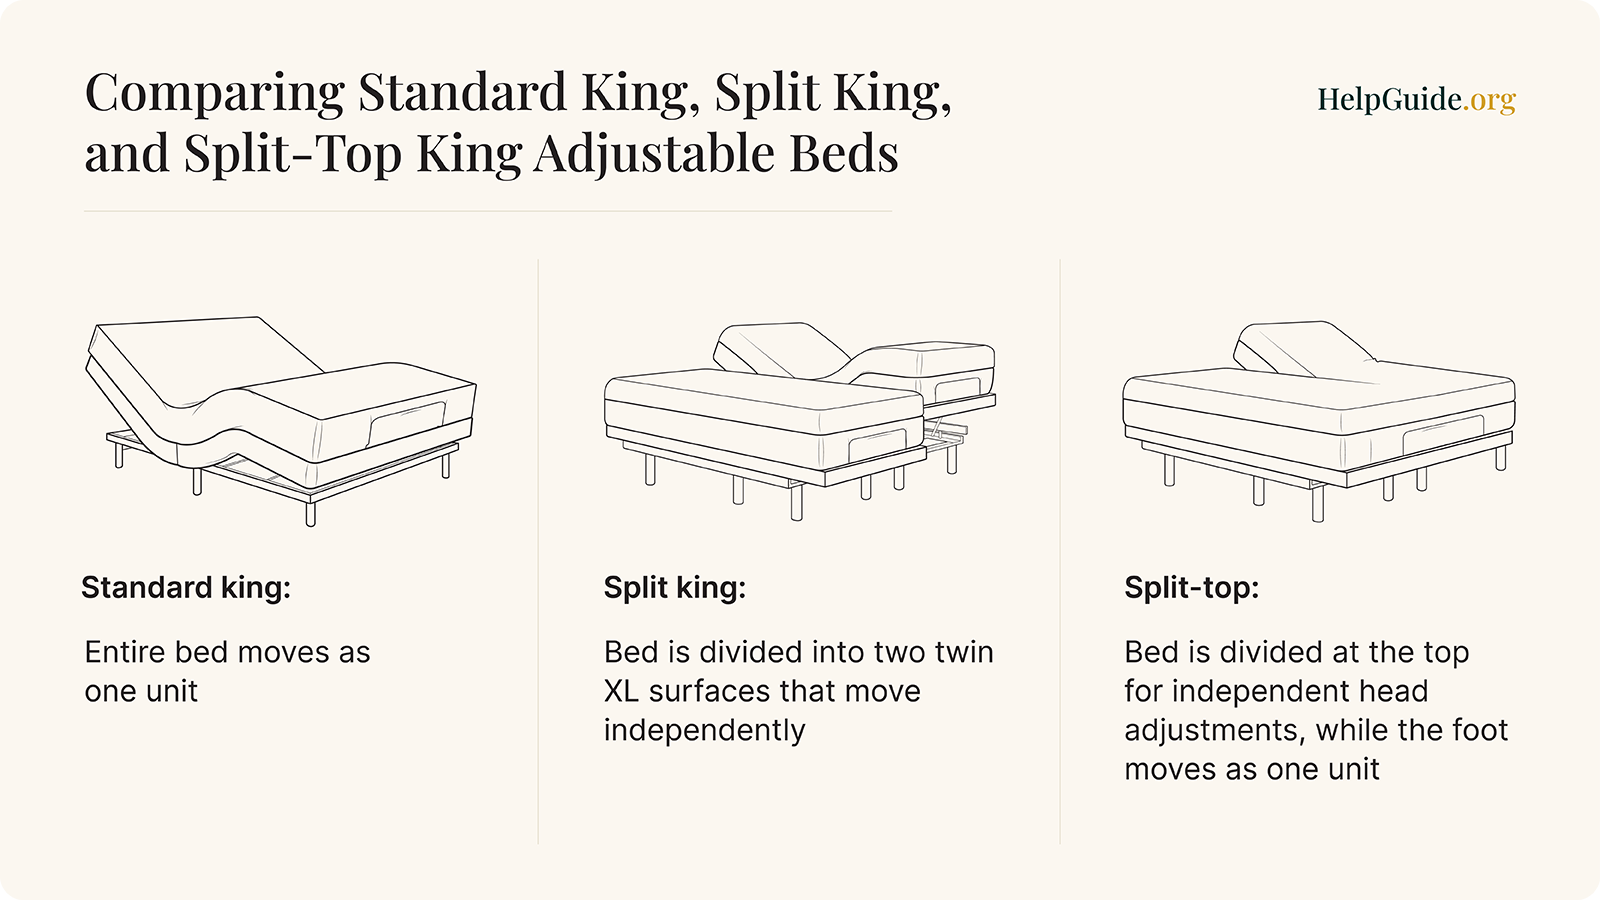 Comparison of the different types of king adjustable beds